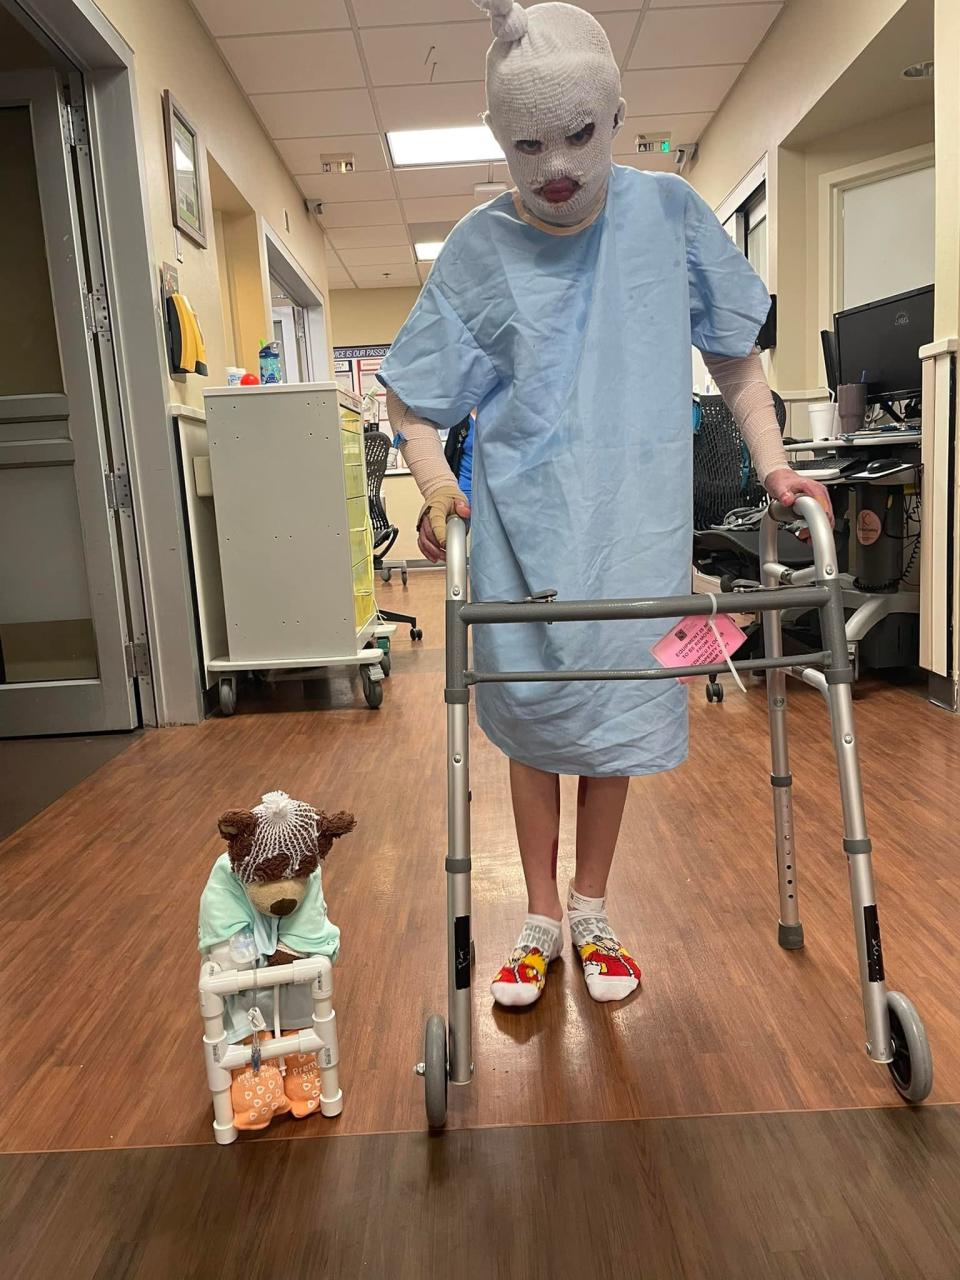 Stuffed friend Brian, and 8-year old burn victim Brantley Parrish. Emergency services are holding a fundraiser to help cover Brantley's medical bills, on May 21 at the Southeast Park Pavilion in Canyon, as a part of National EMS Week.